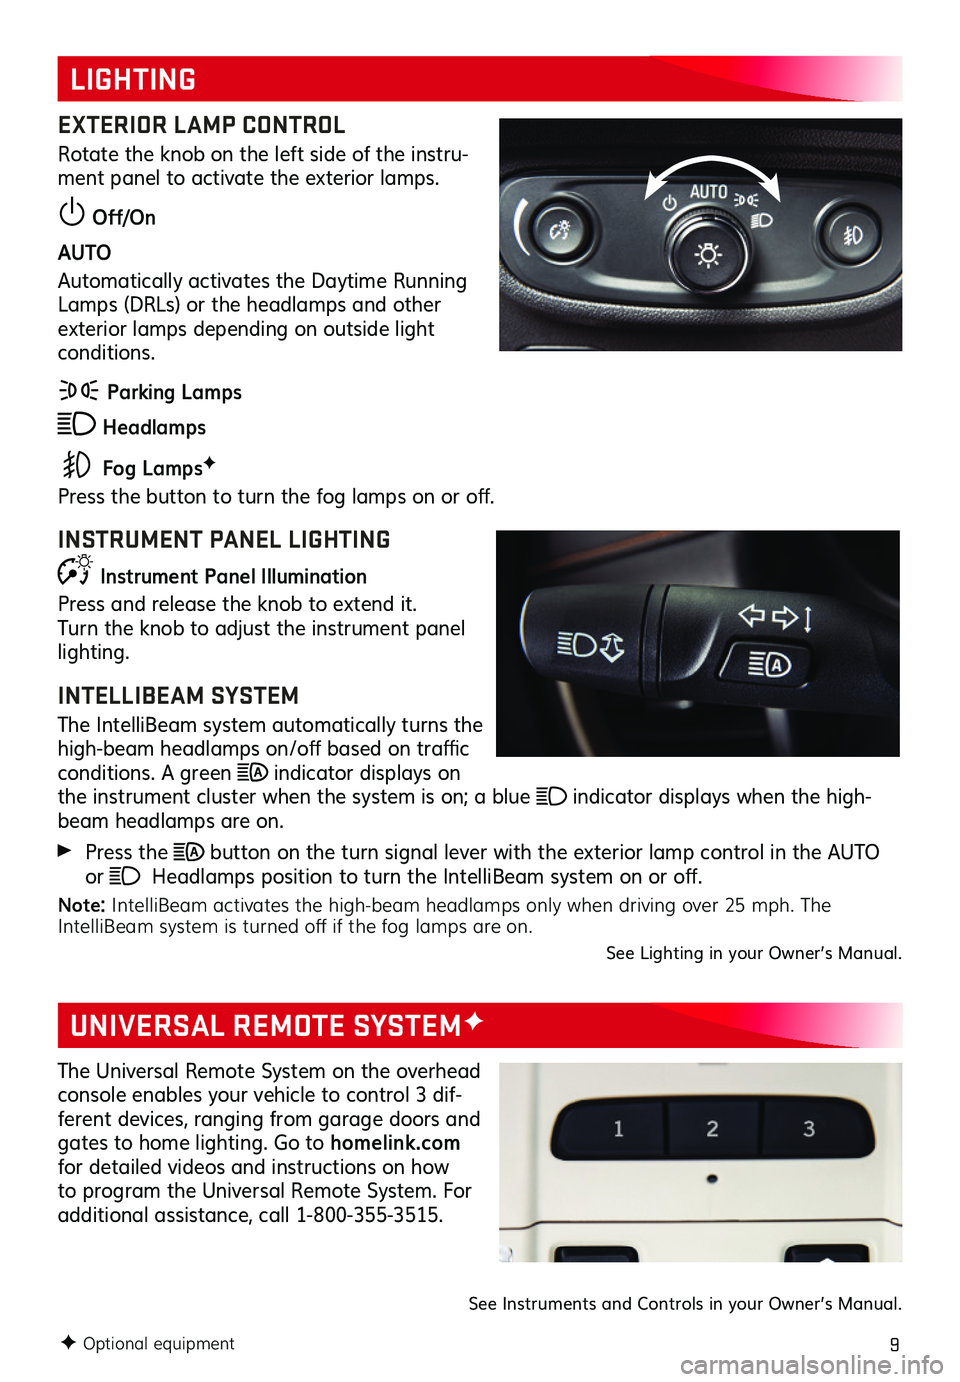 GMC TERRAIN 2021  Get To Know Guide 9
LIGHTING
UNIVERSAL REMOTE SYSTEMF
EXTERIOR LAMP CONTROL
Rotate the knob on the left side of the instru-ment panel to activate the exterior lamps.
 Off/On
AUTO 
Automatically activates the Daytime Ru